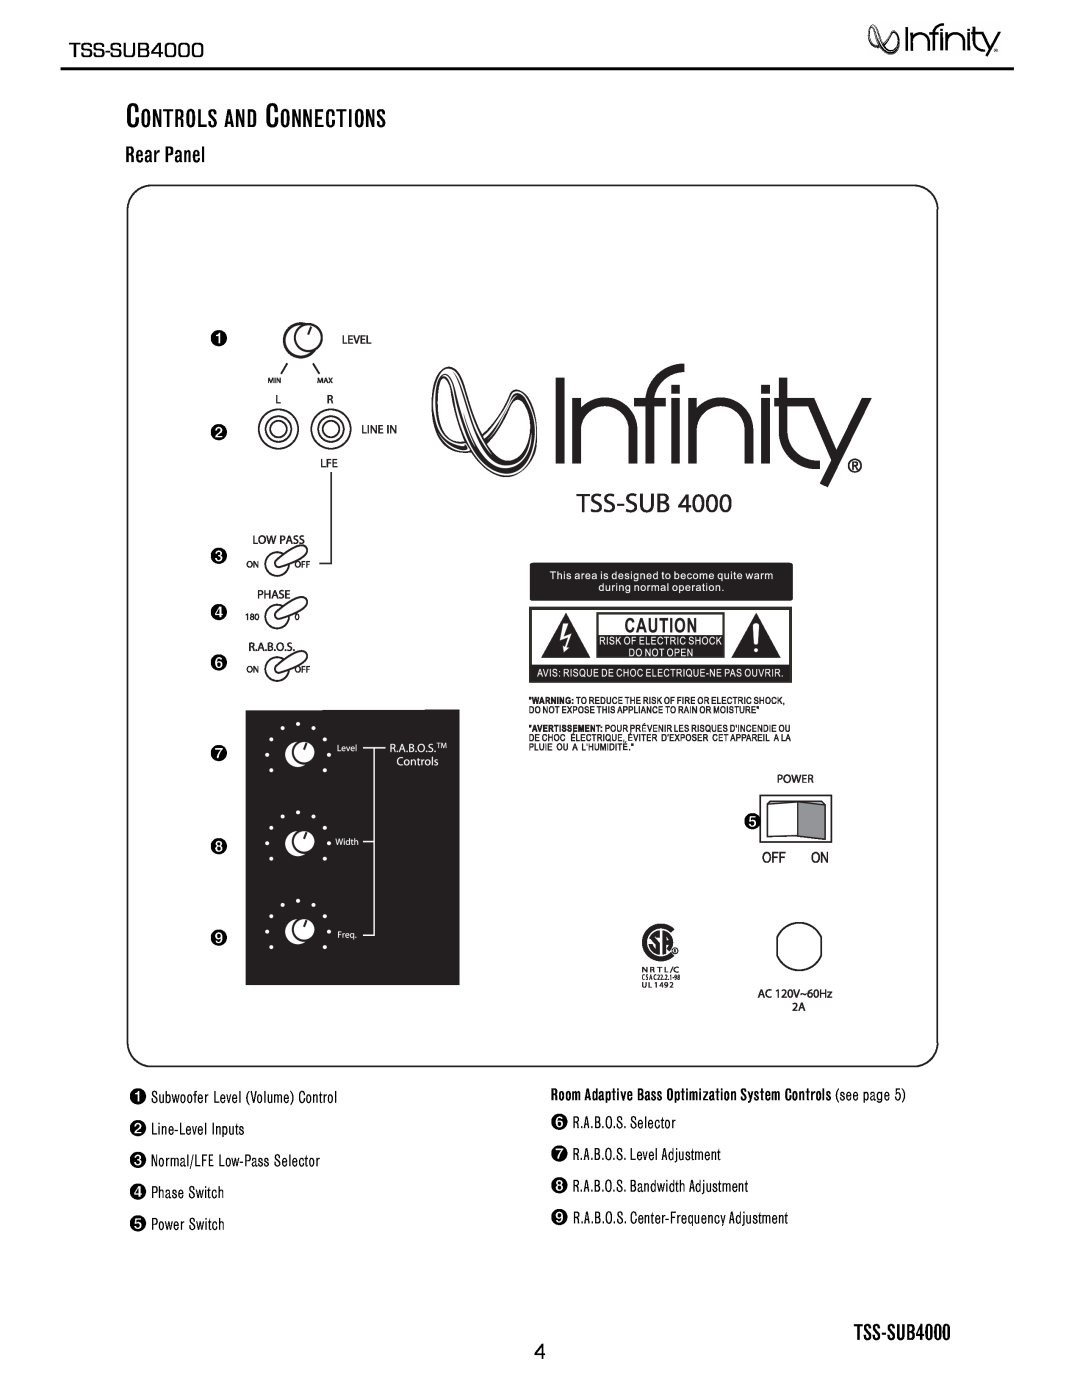 Infinity TSS-SUB4000 Controls And Connections, £ ¢ § ¶ ª, ¡ Subwoofer Level Volume Control, Line-LevelInputs, Phase Switch 